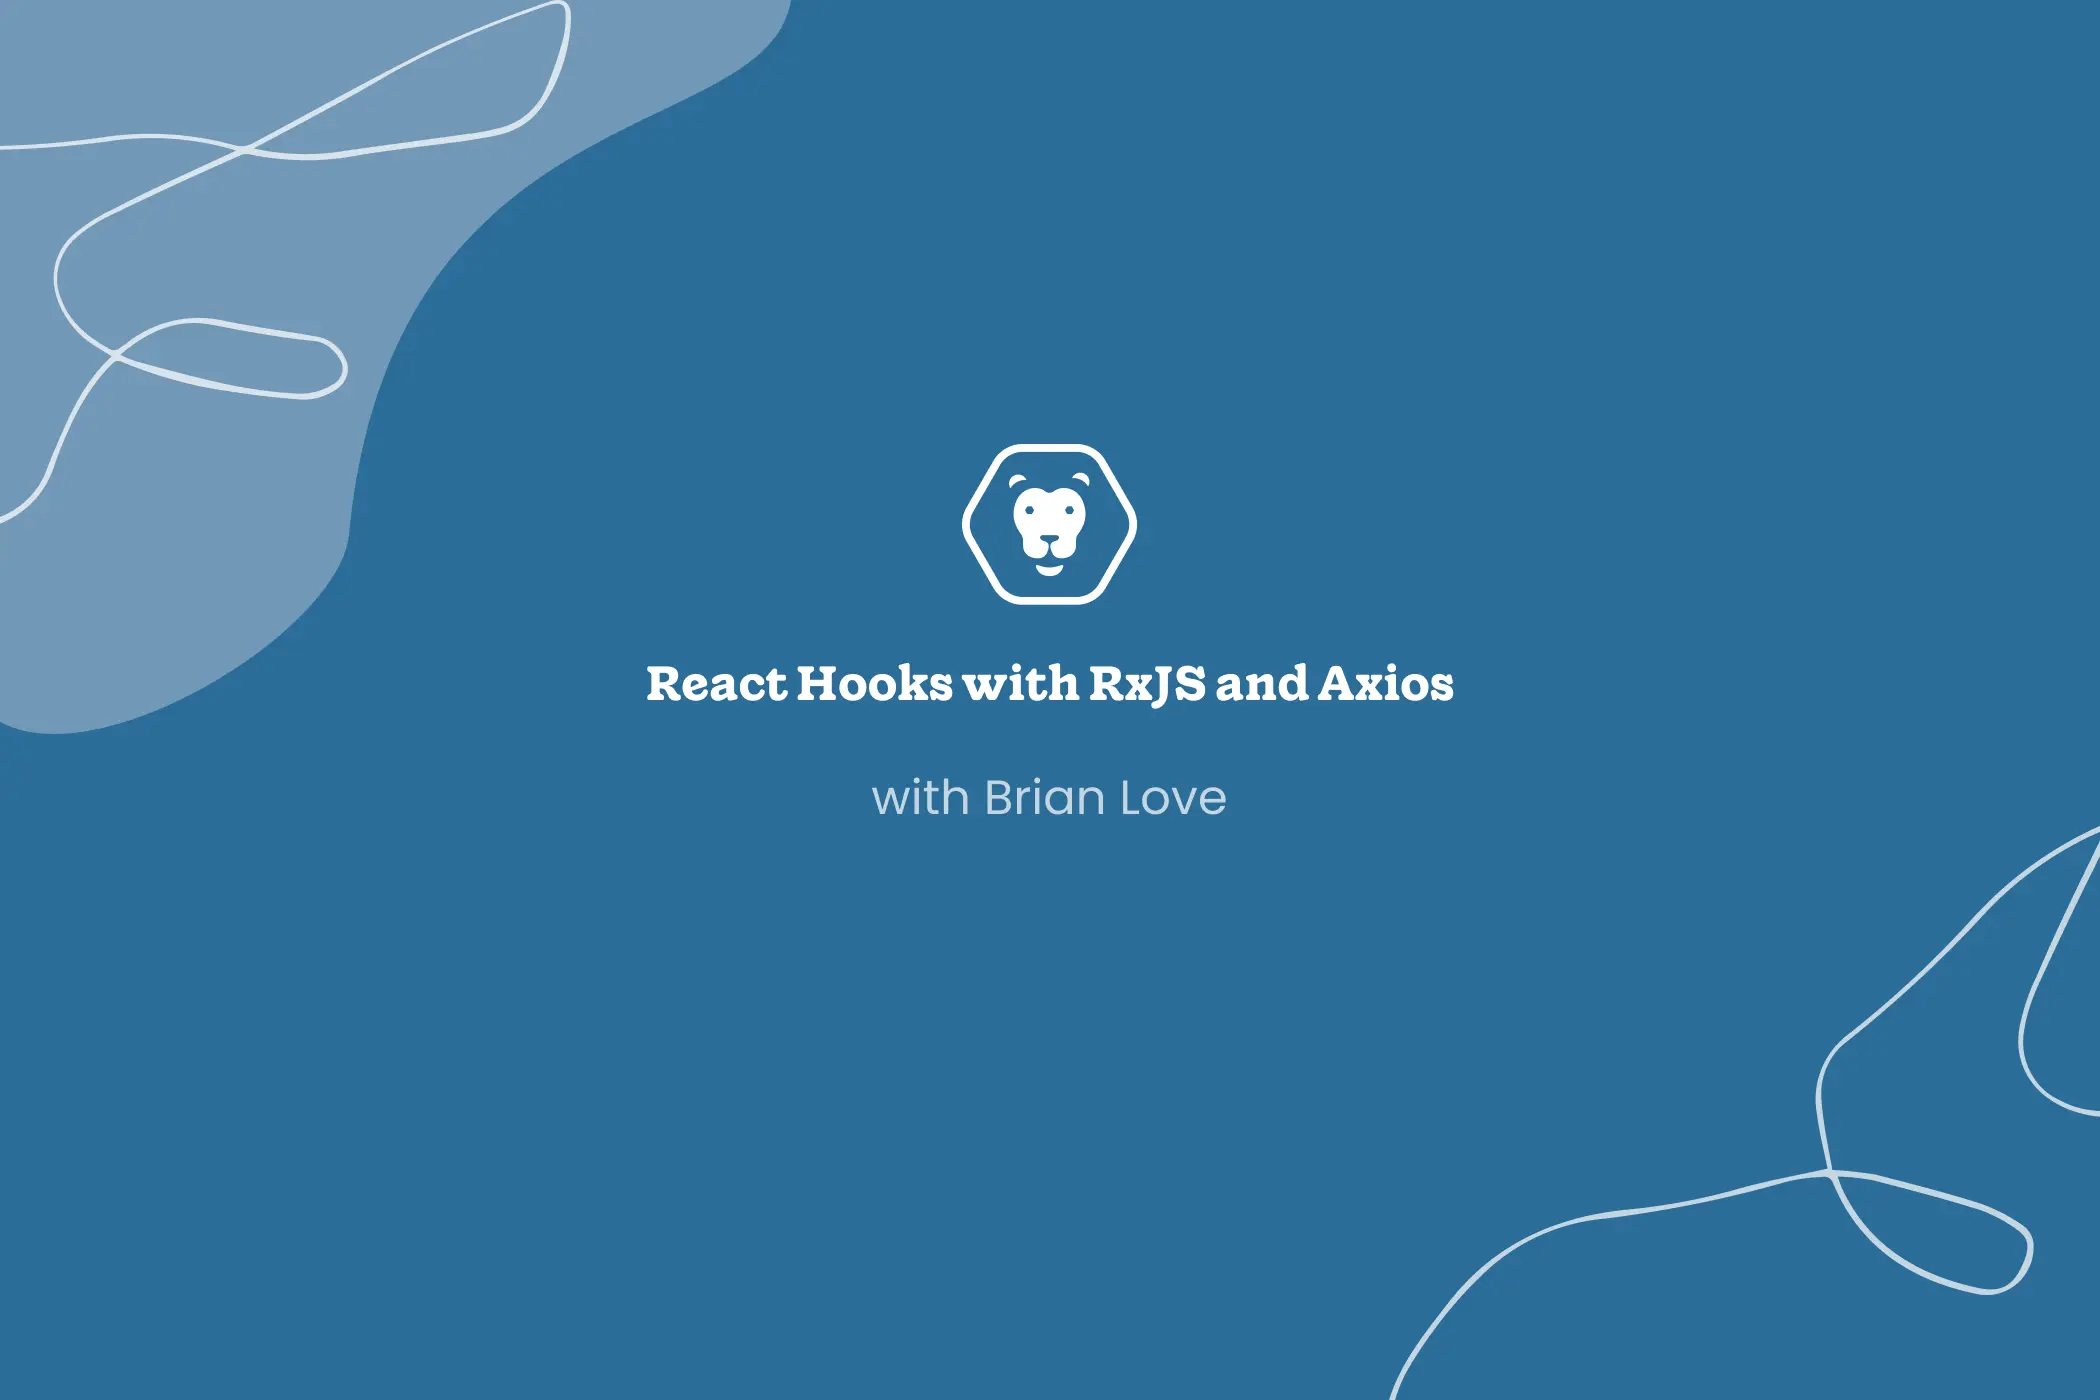 React Hooks with RxJS and Axios